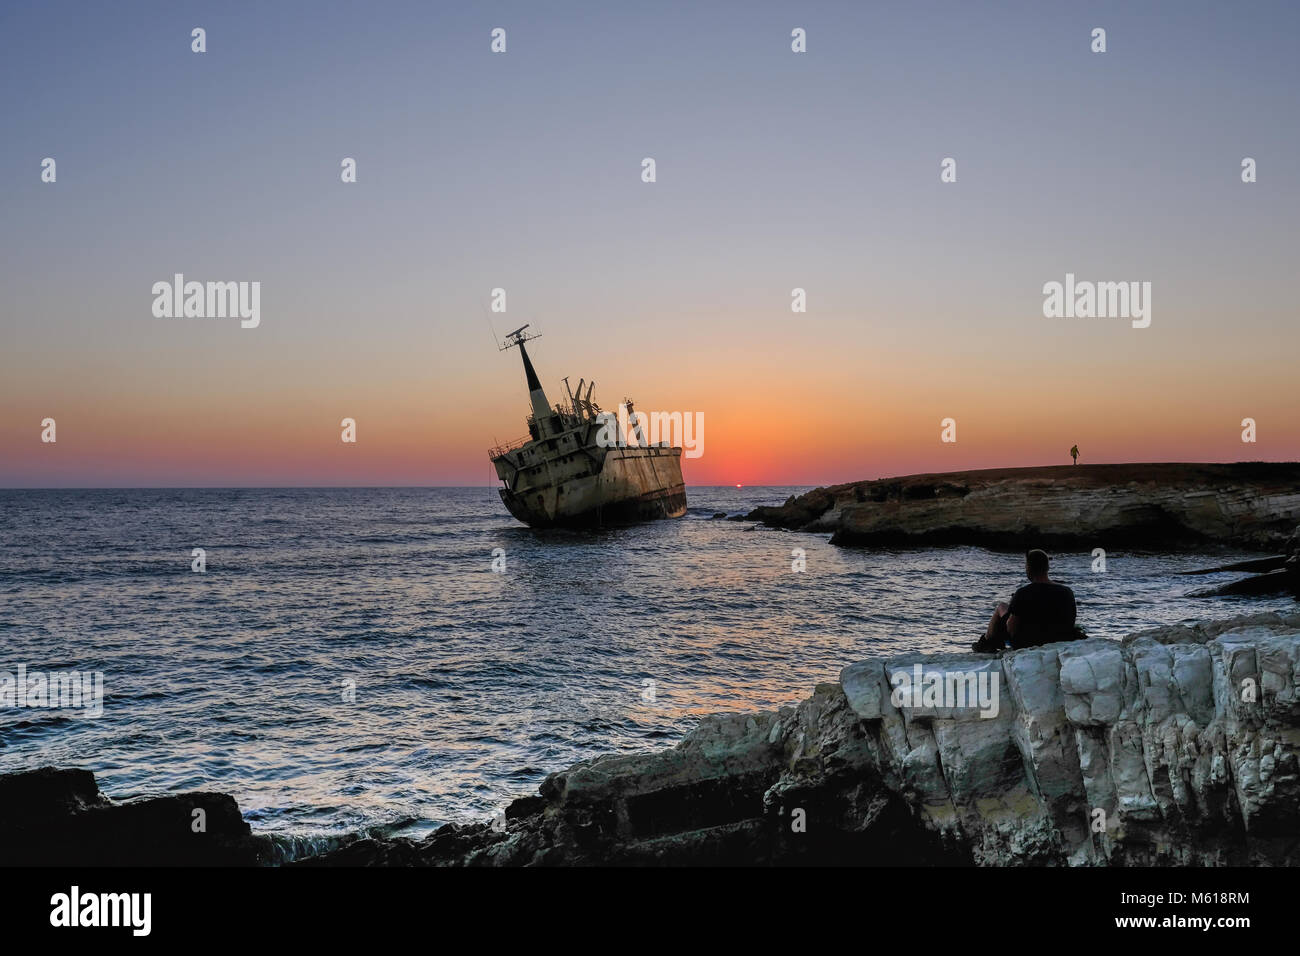 Man sitting watching the sun set over landmark  shipwreck in Pafos, Cyprus. Stock Photo